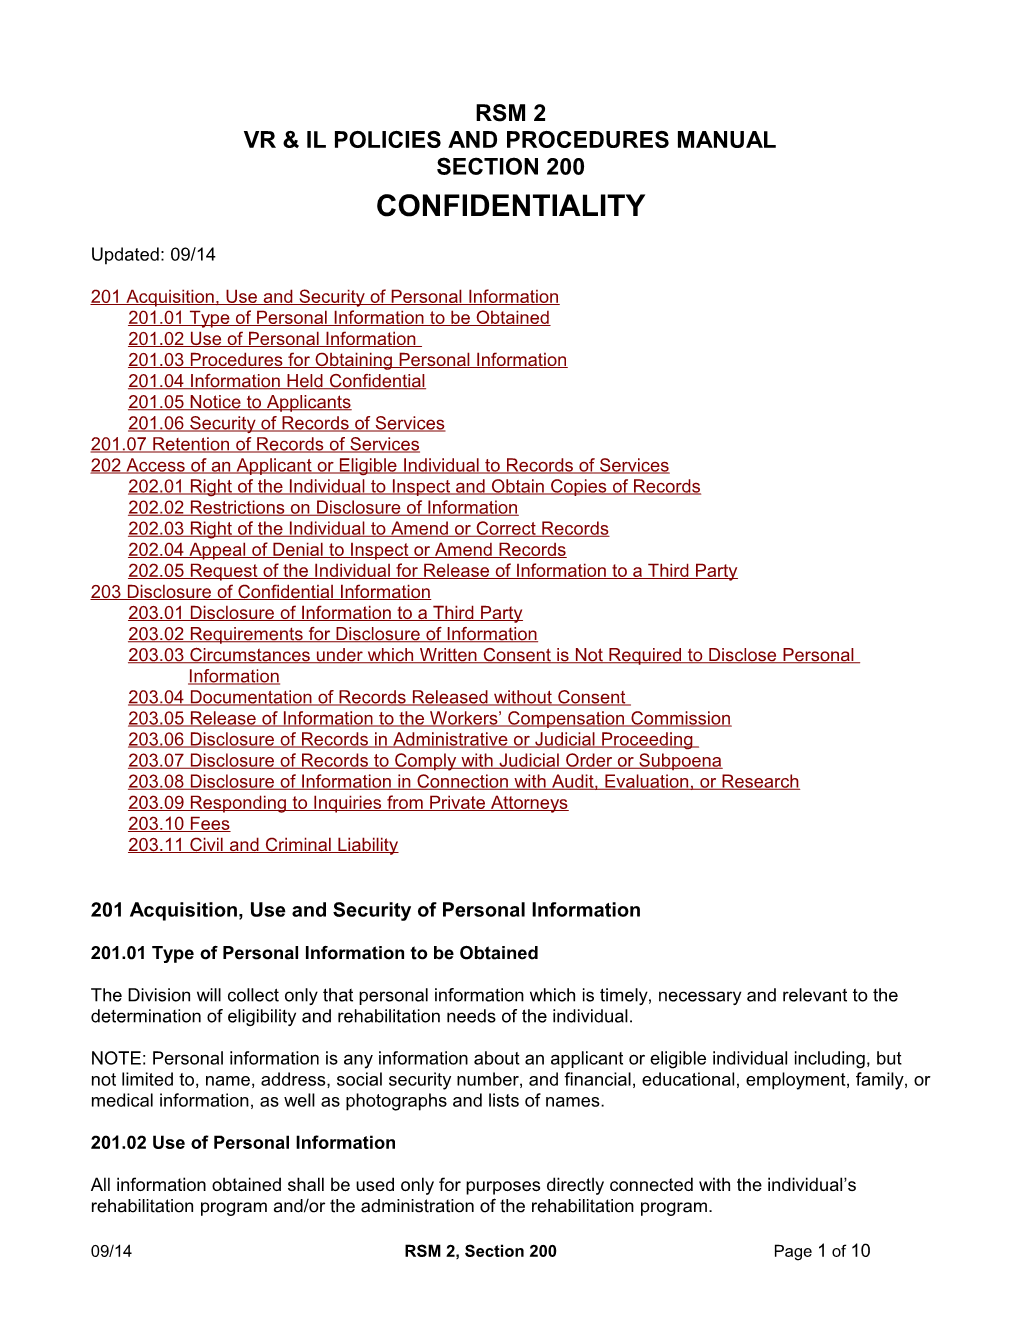 RSM 2, Section 200: Confidentiality